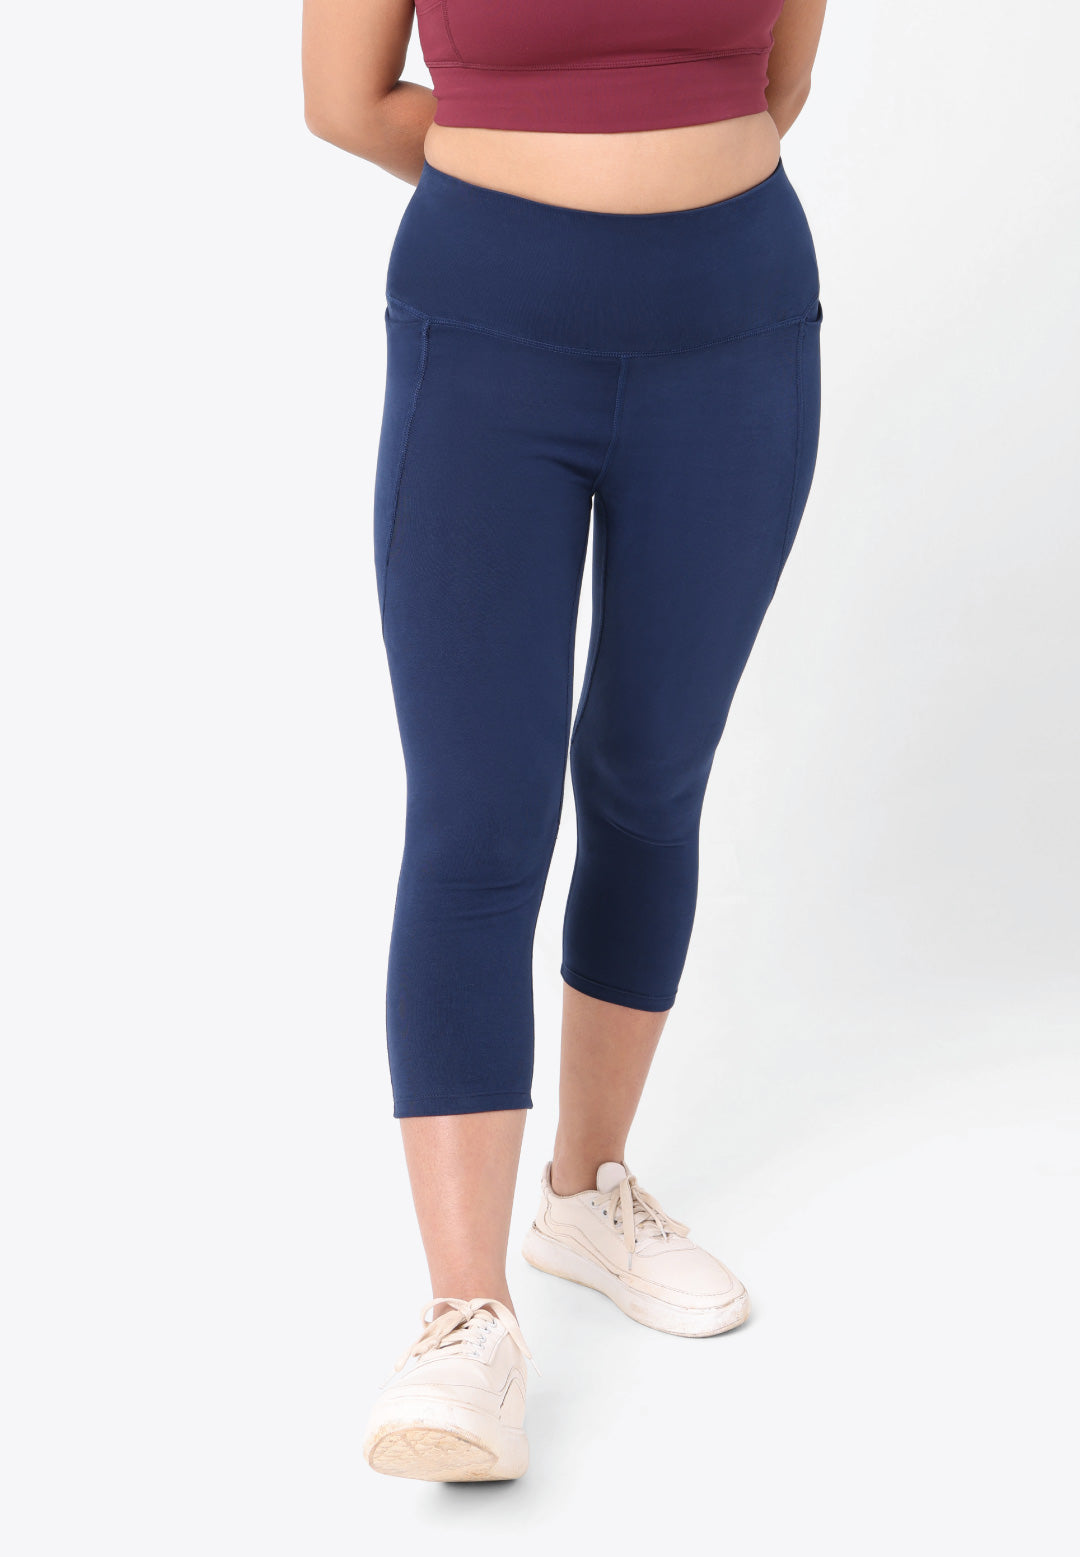 Buy Yoga Clothes for Women & Girls Online from BlissClub